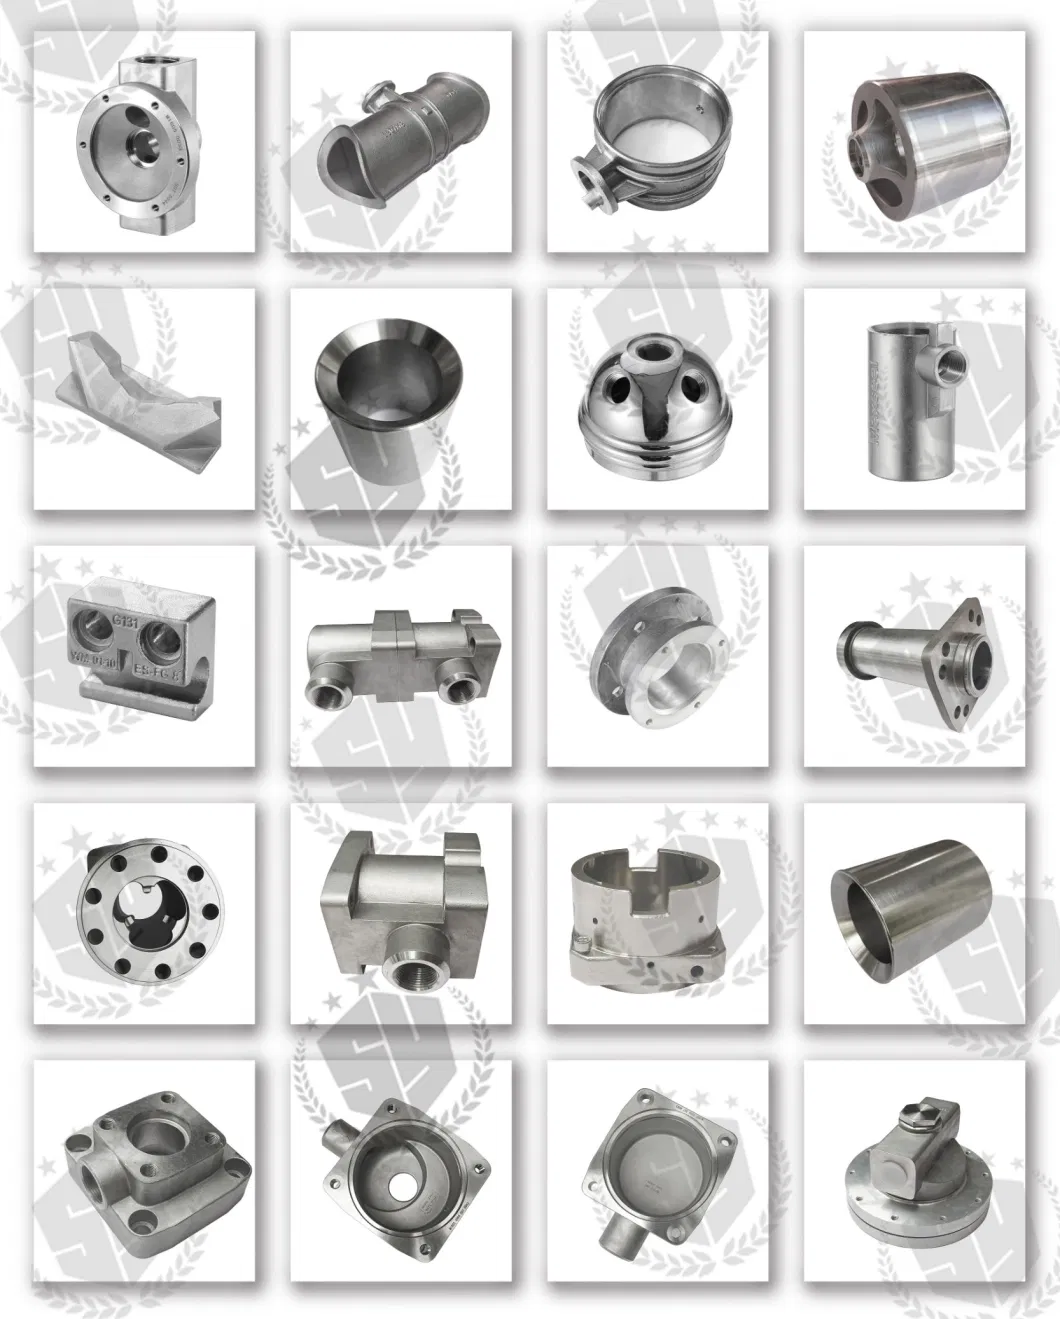 OEM Investment Casting Lost Wax Casting Corrosion Resistant Steel J92600/J92602/J92710 Non-Standard Spare Parts Investment Casting Fabrication